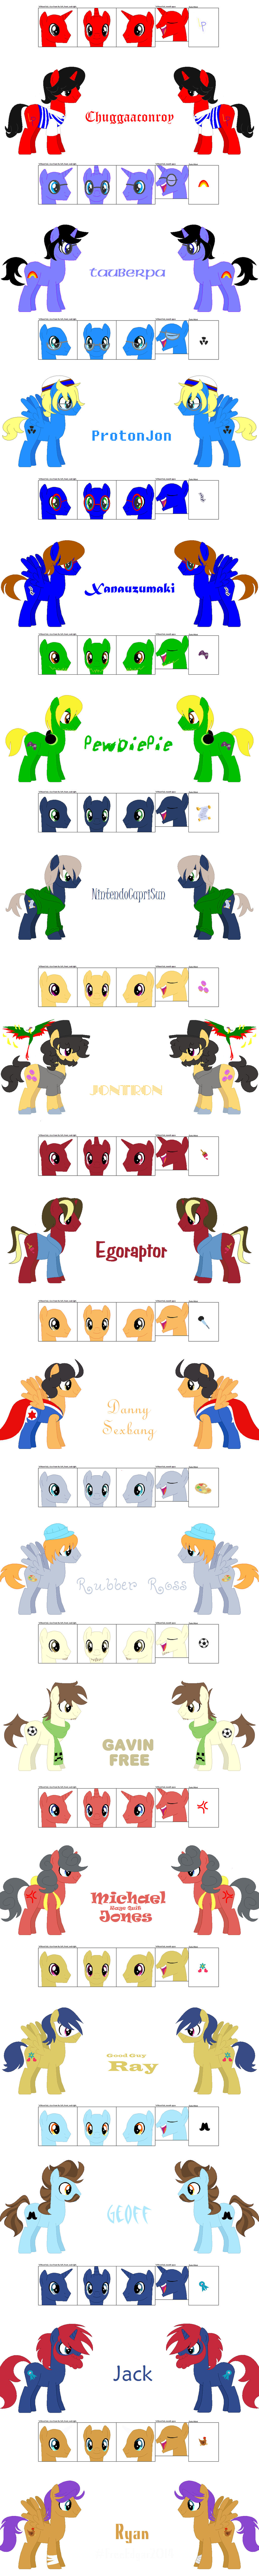 Youtube Ponies Reference Sheet